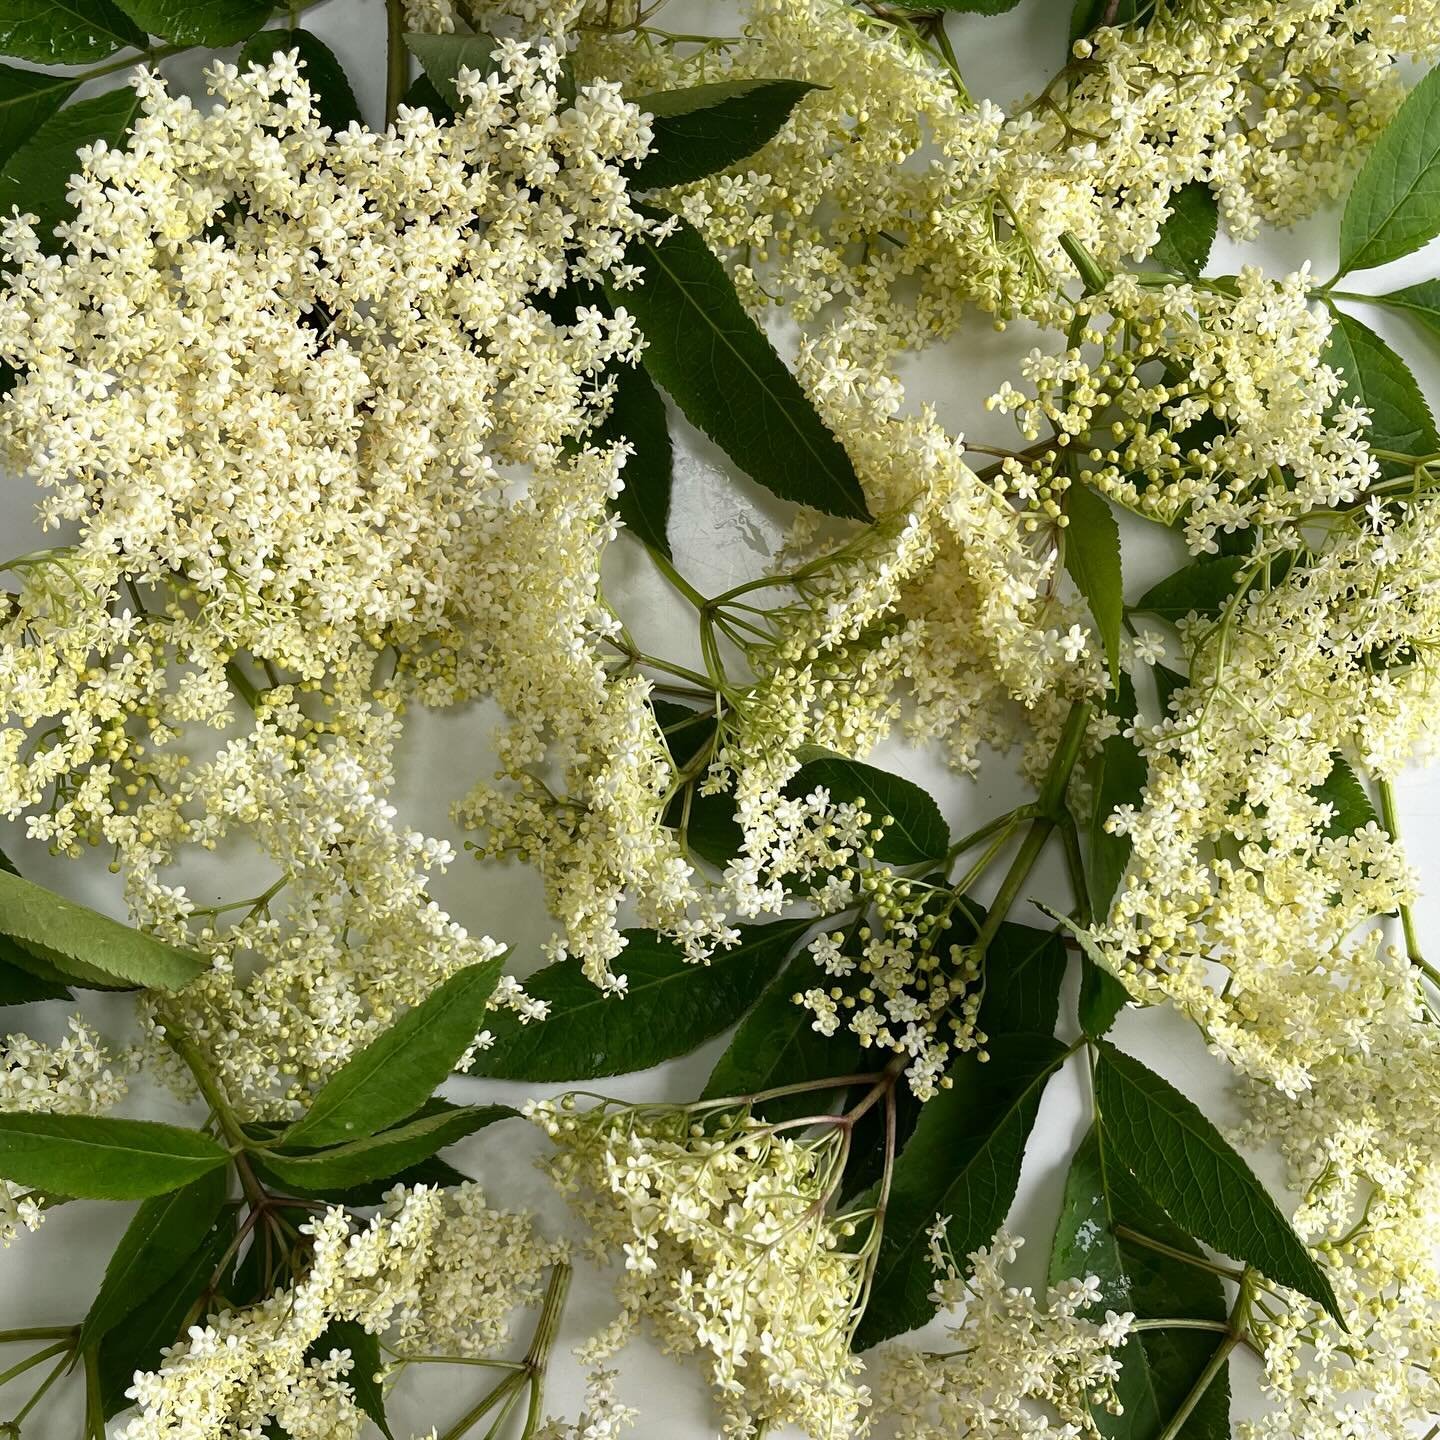 Time to forage elderflower !!
These were collected on the banks of the Thames this weekend ! 

I am looking for some ideas of what to make with them? 
.
.
.
#topdelish #foraging #elderflower #rawkitchen #cuillettesauvage #fleursdesureau #bestingredie